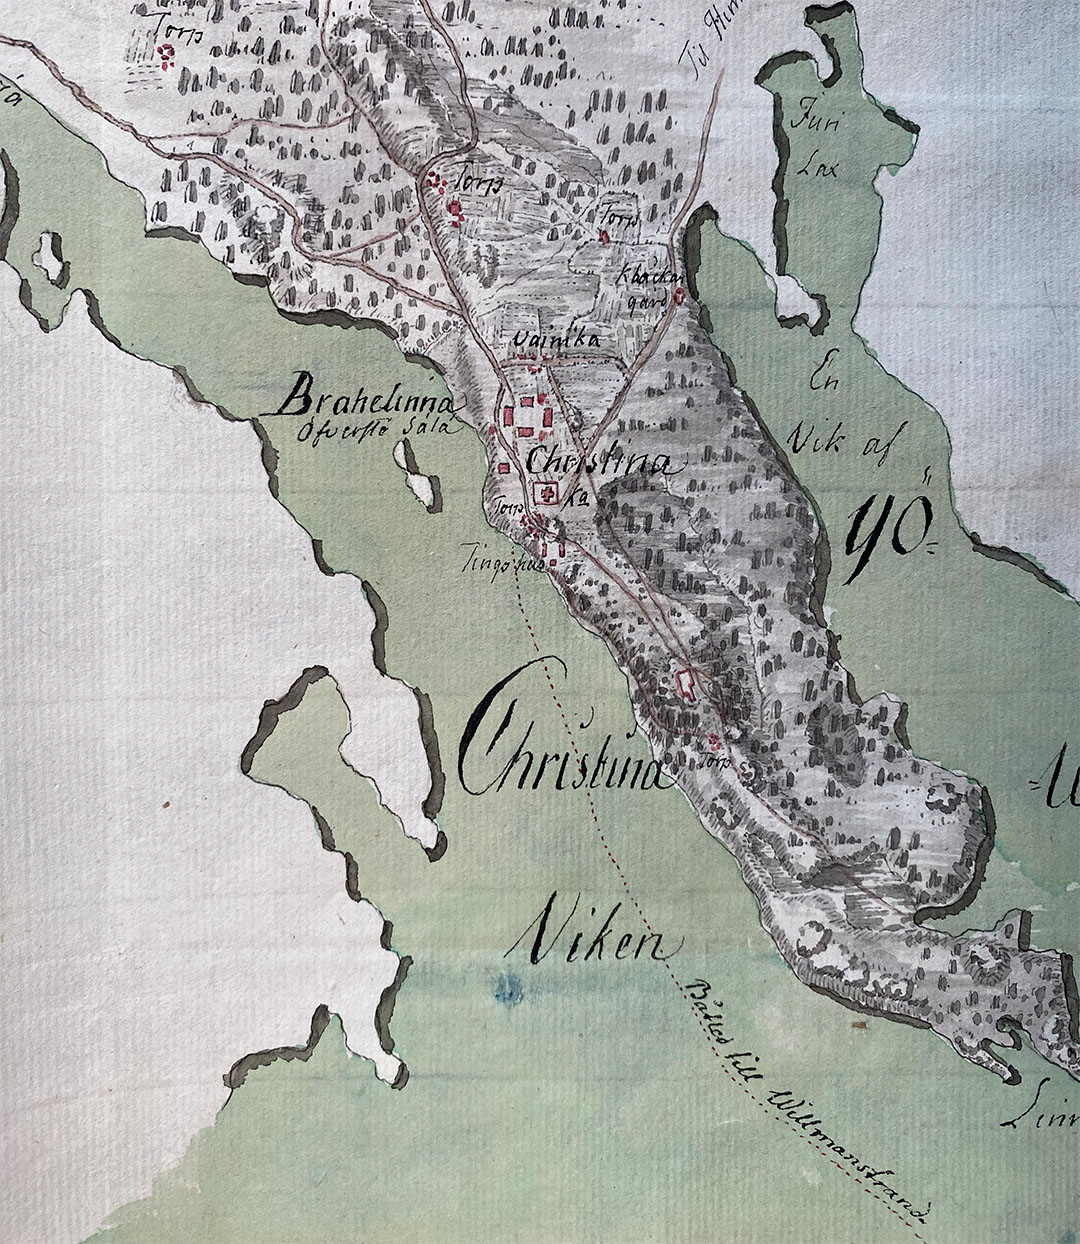 Old map of Ristiina from the 1700s. 